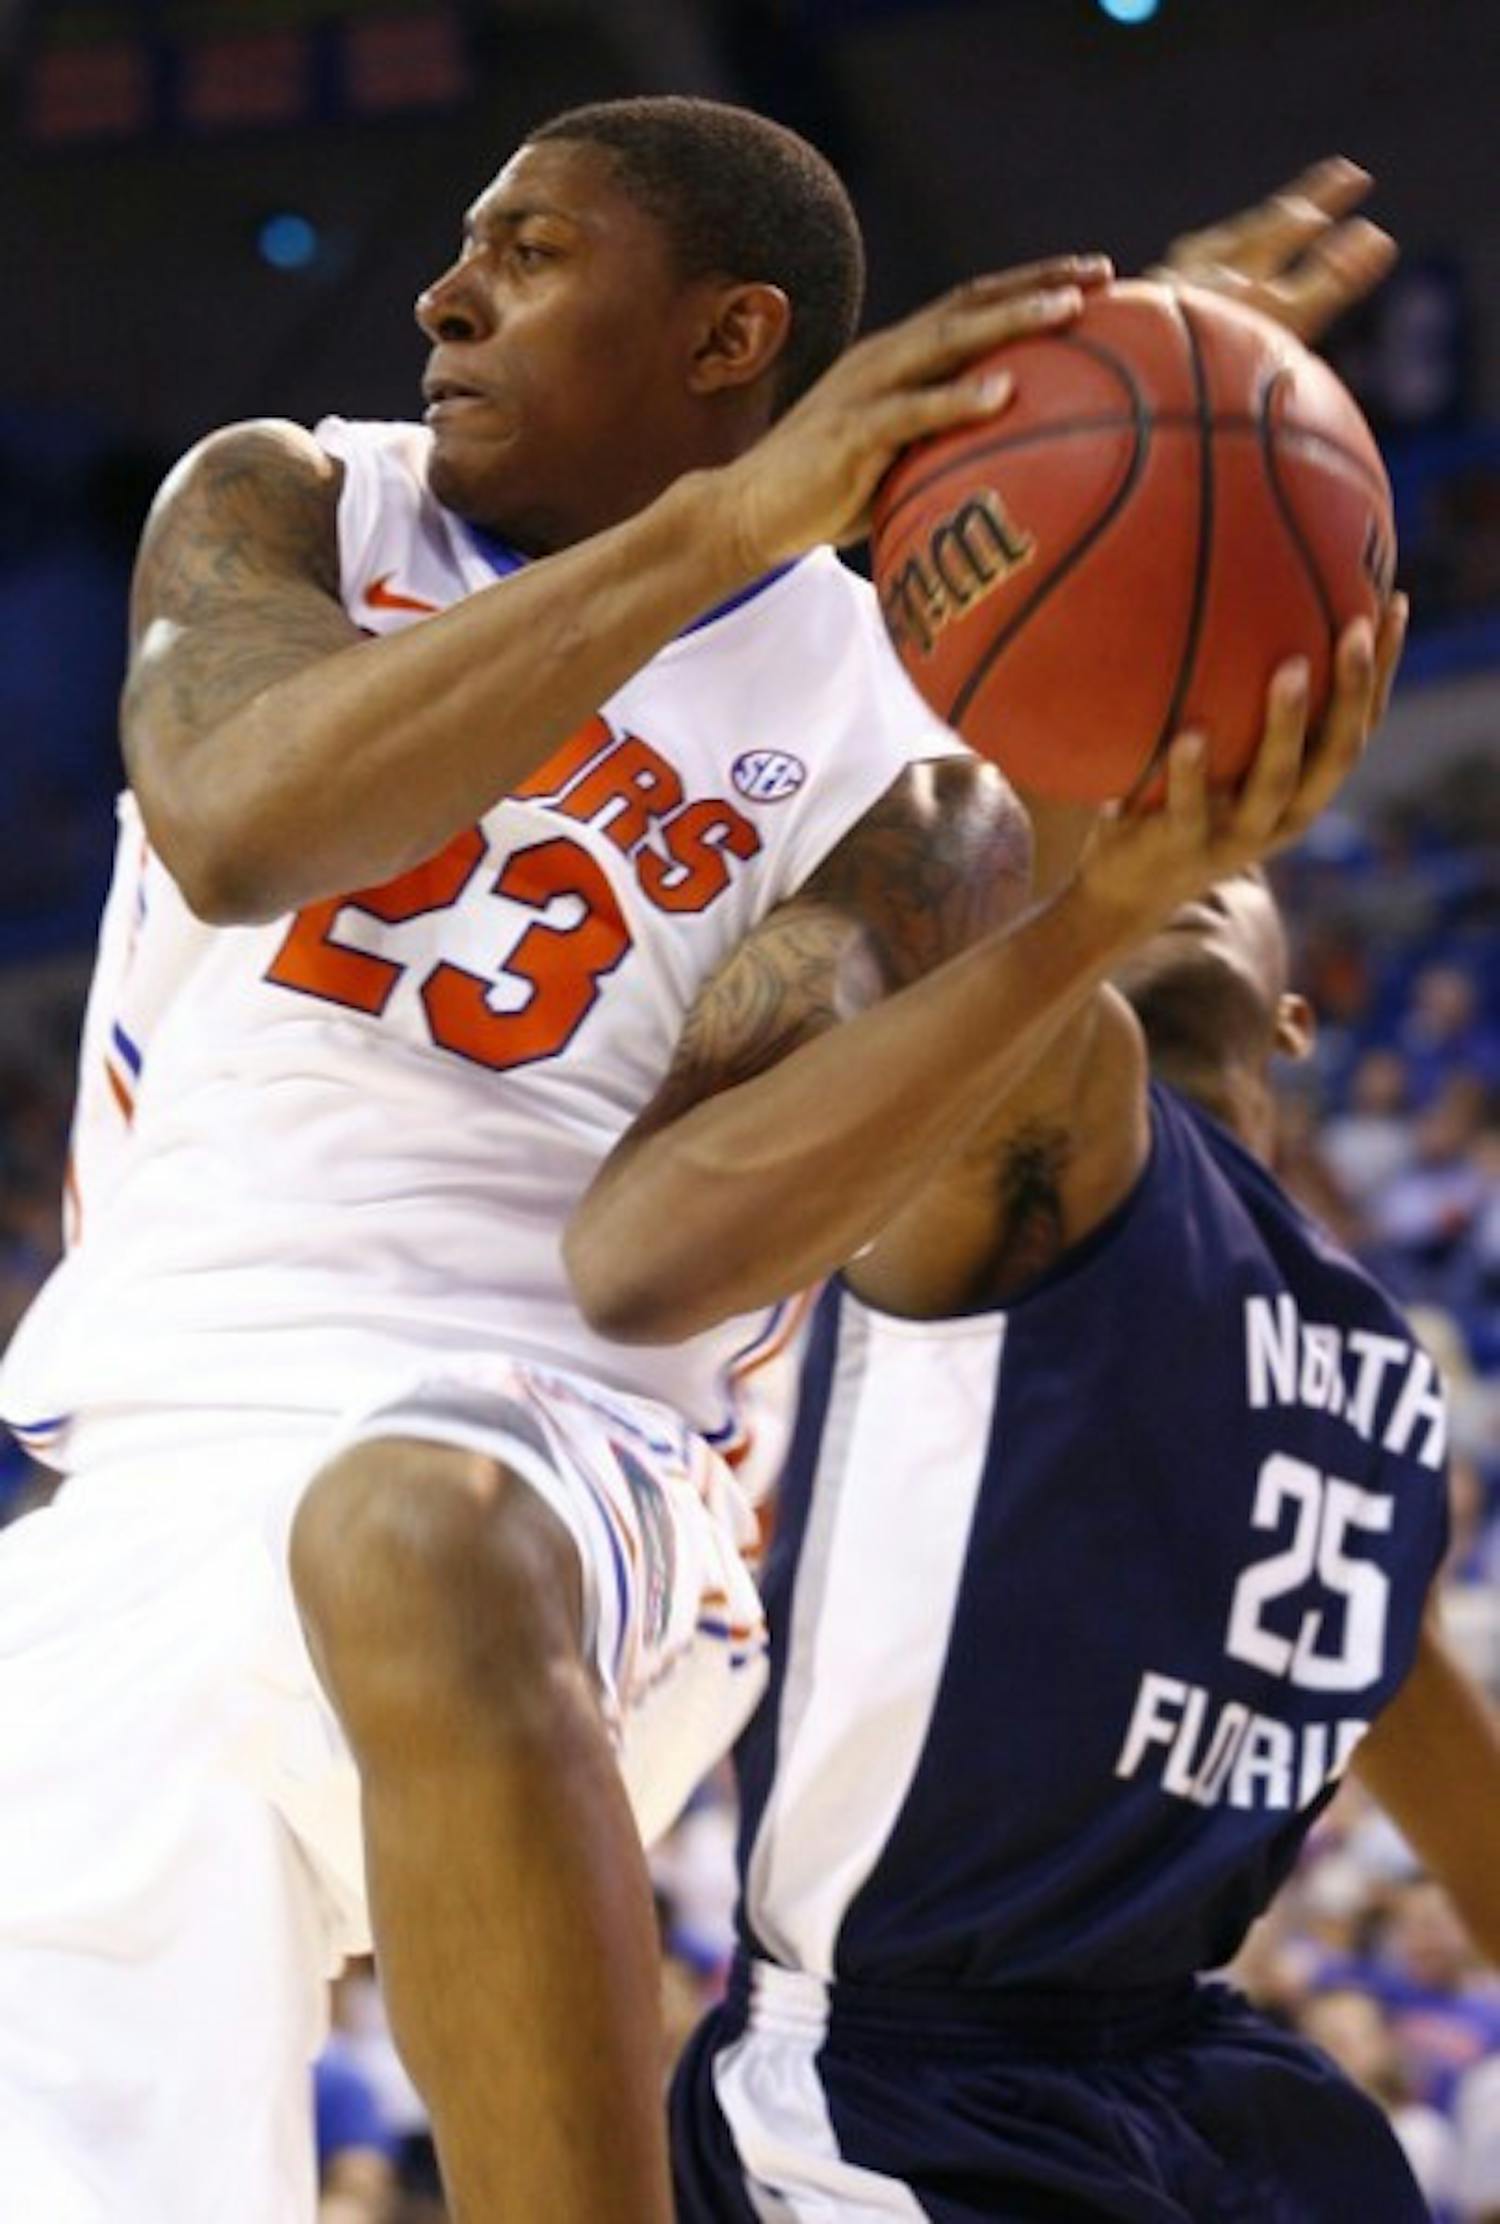 Florida freshman Brad Beal (23) scored 12 points and grabbed 10 rebounds in a 91-55 win against UNF on Wednesday.